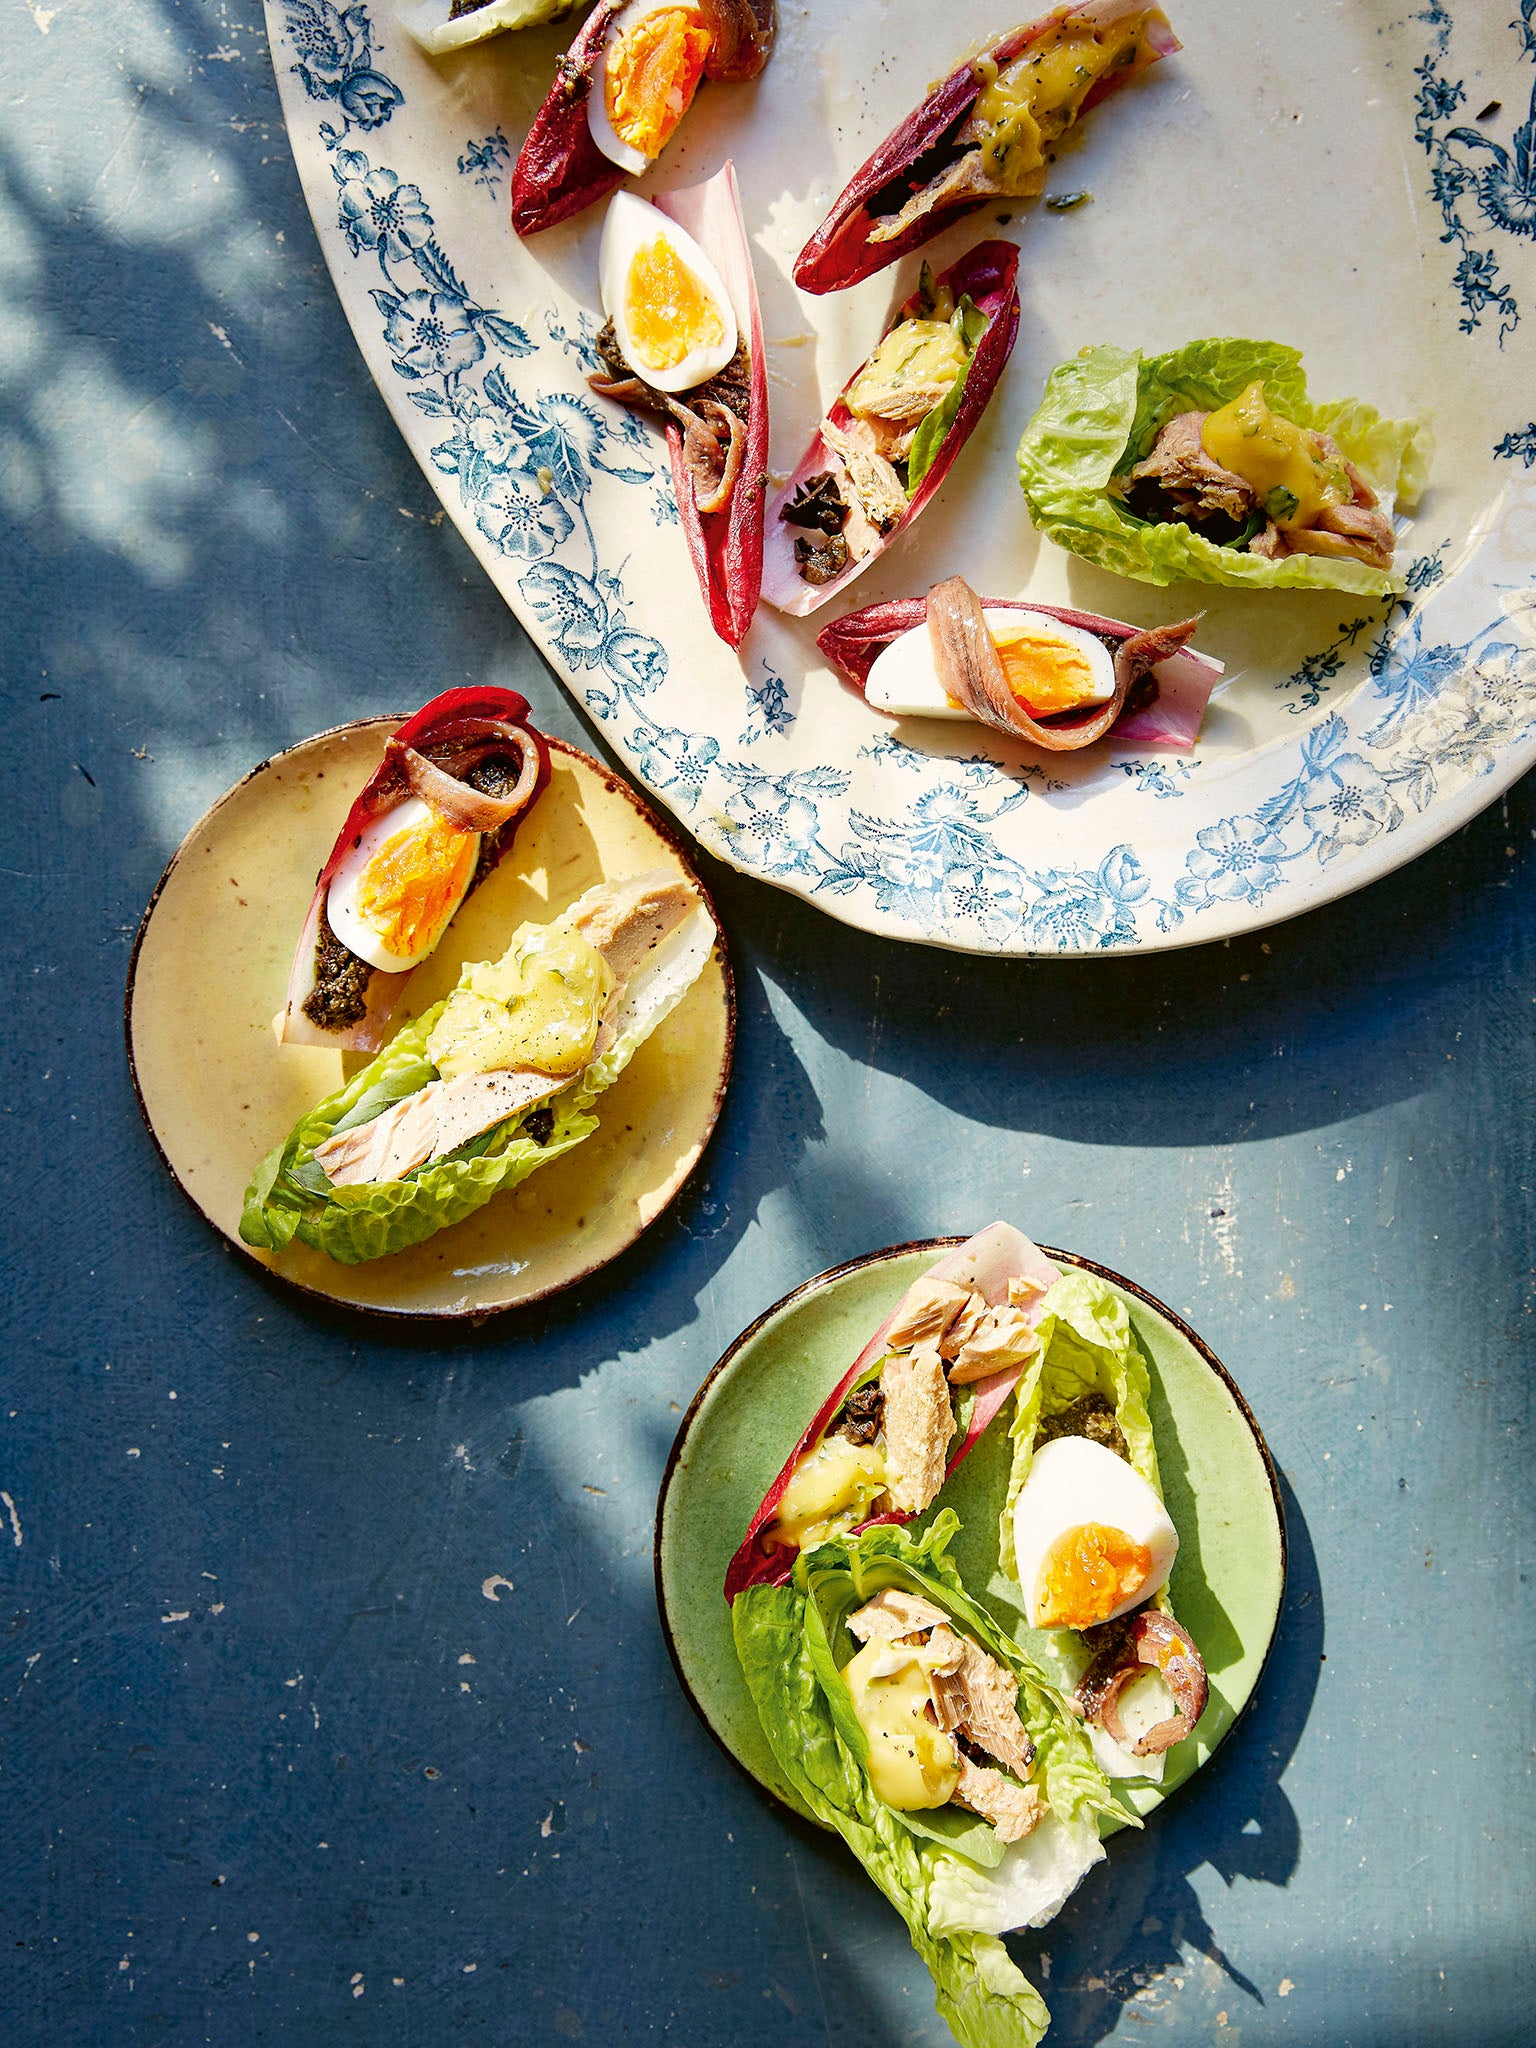 These cute little bundles are perfect for a summer lunch or BBQ starter